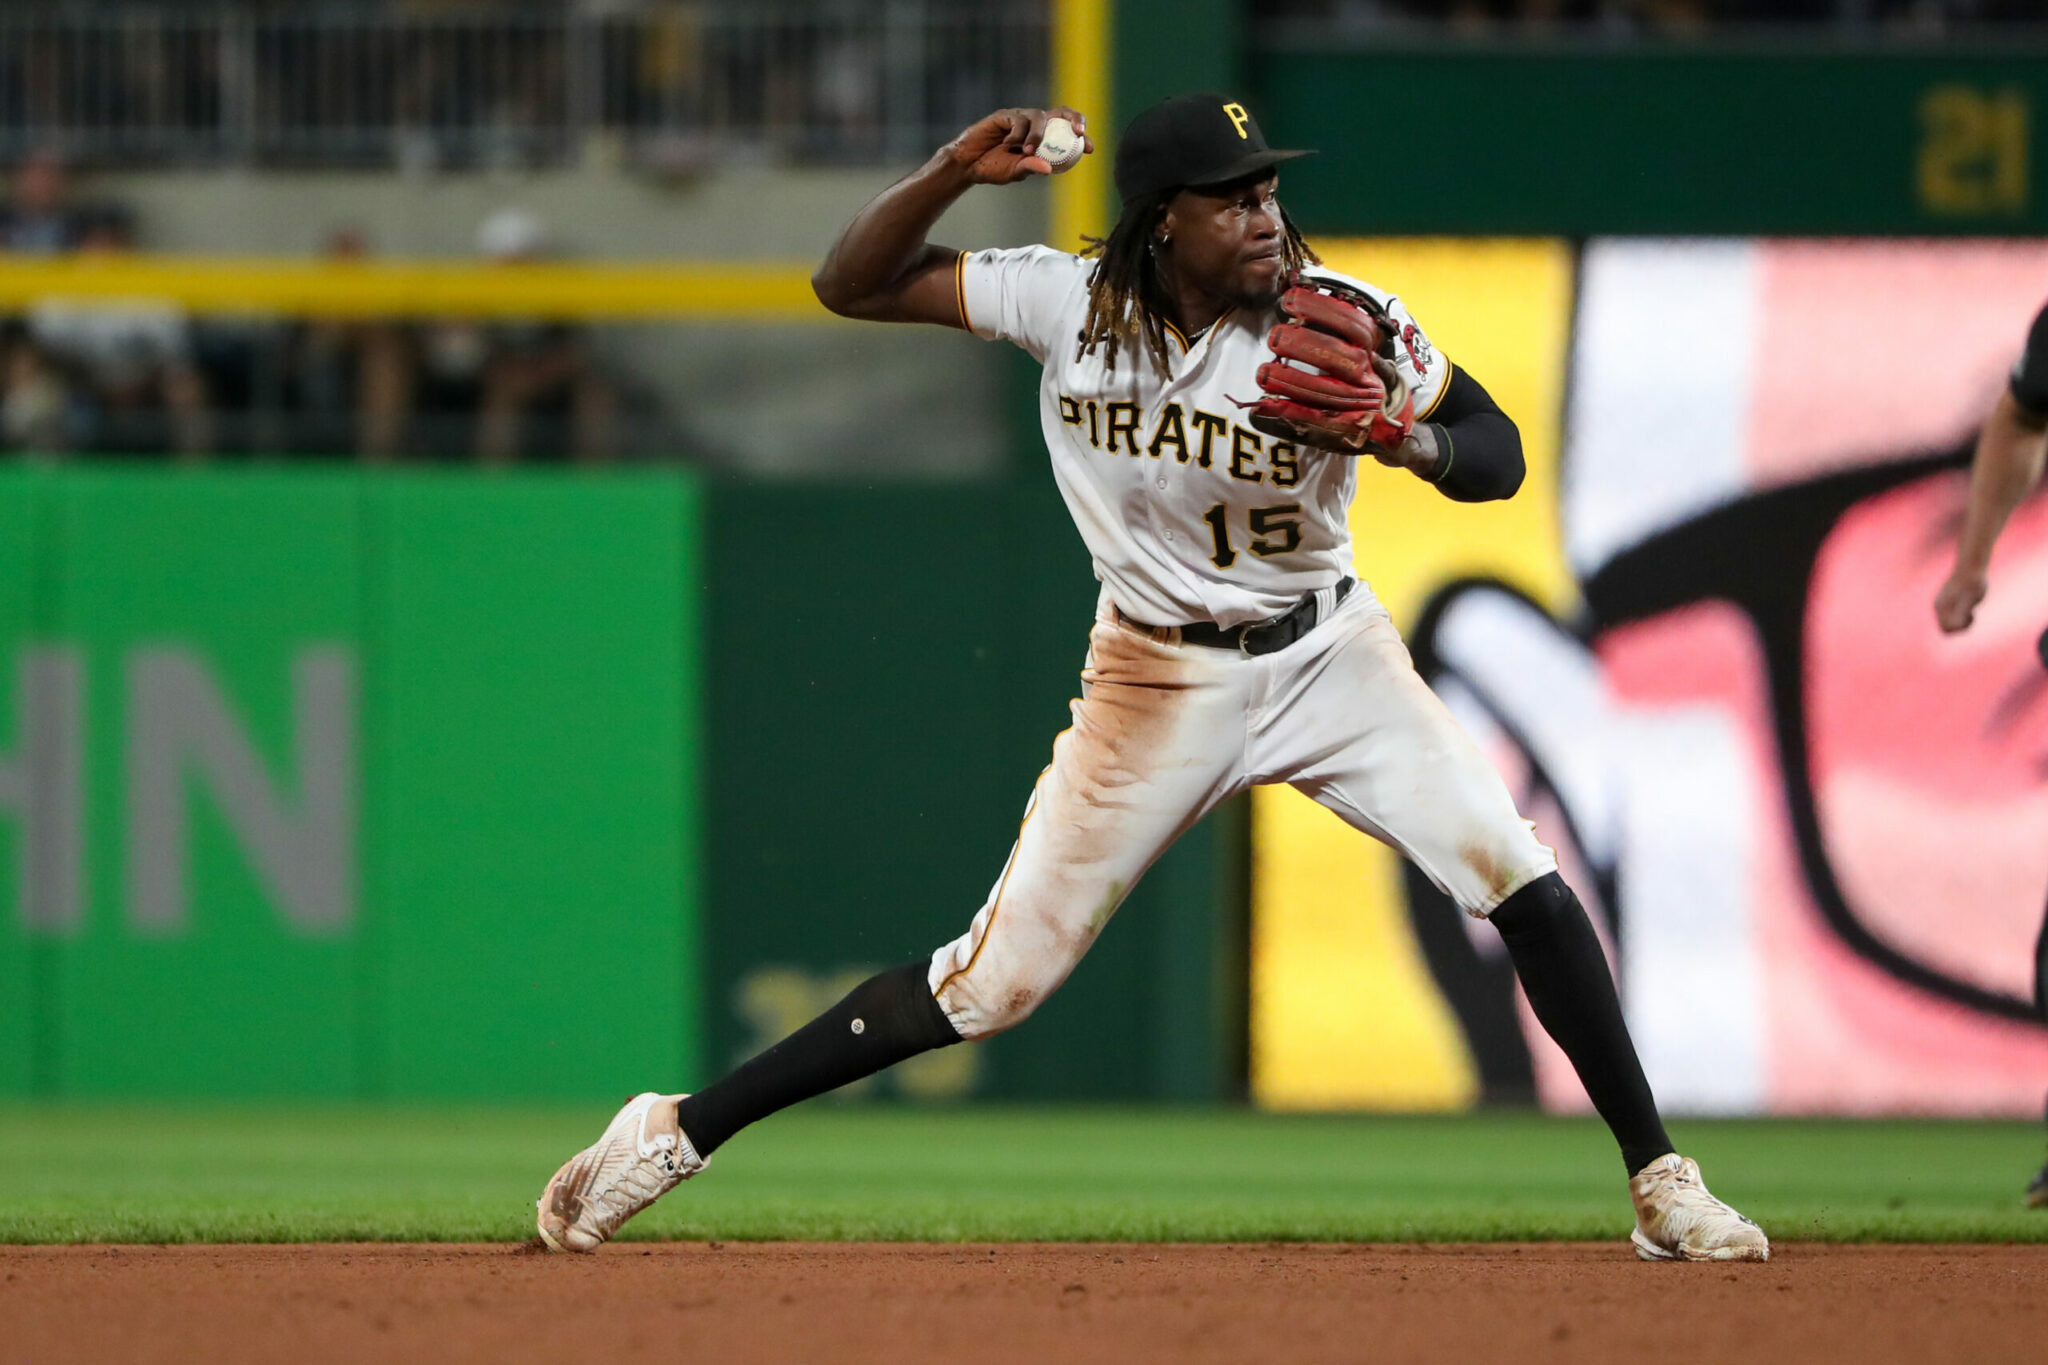 Williams: Are the Pirates Headed in a Positive Direction?